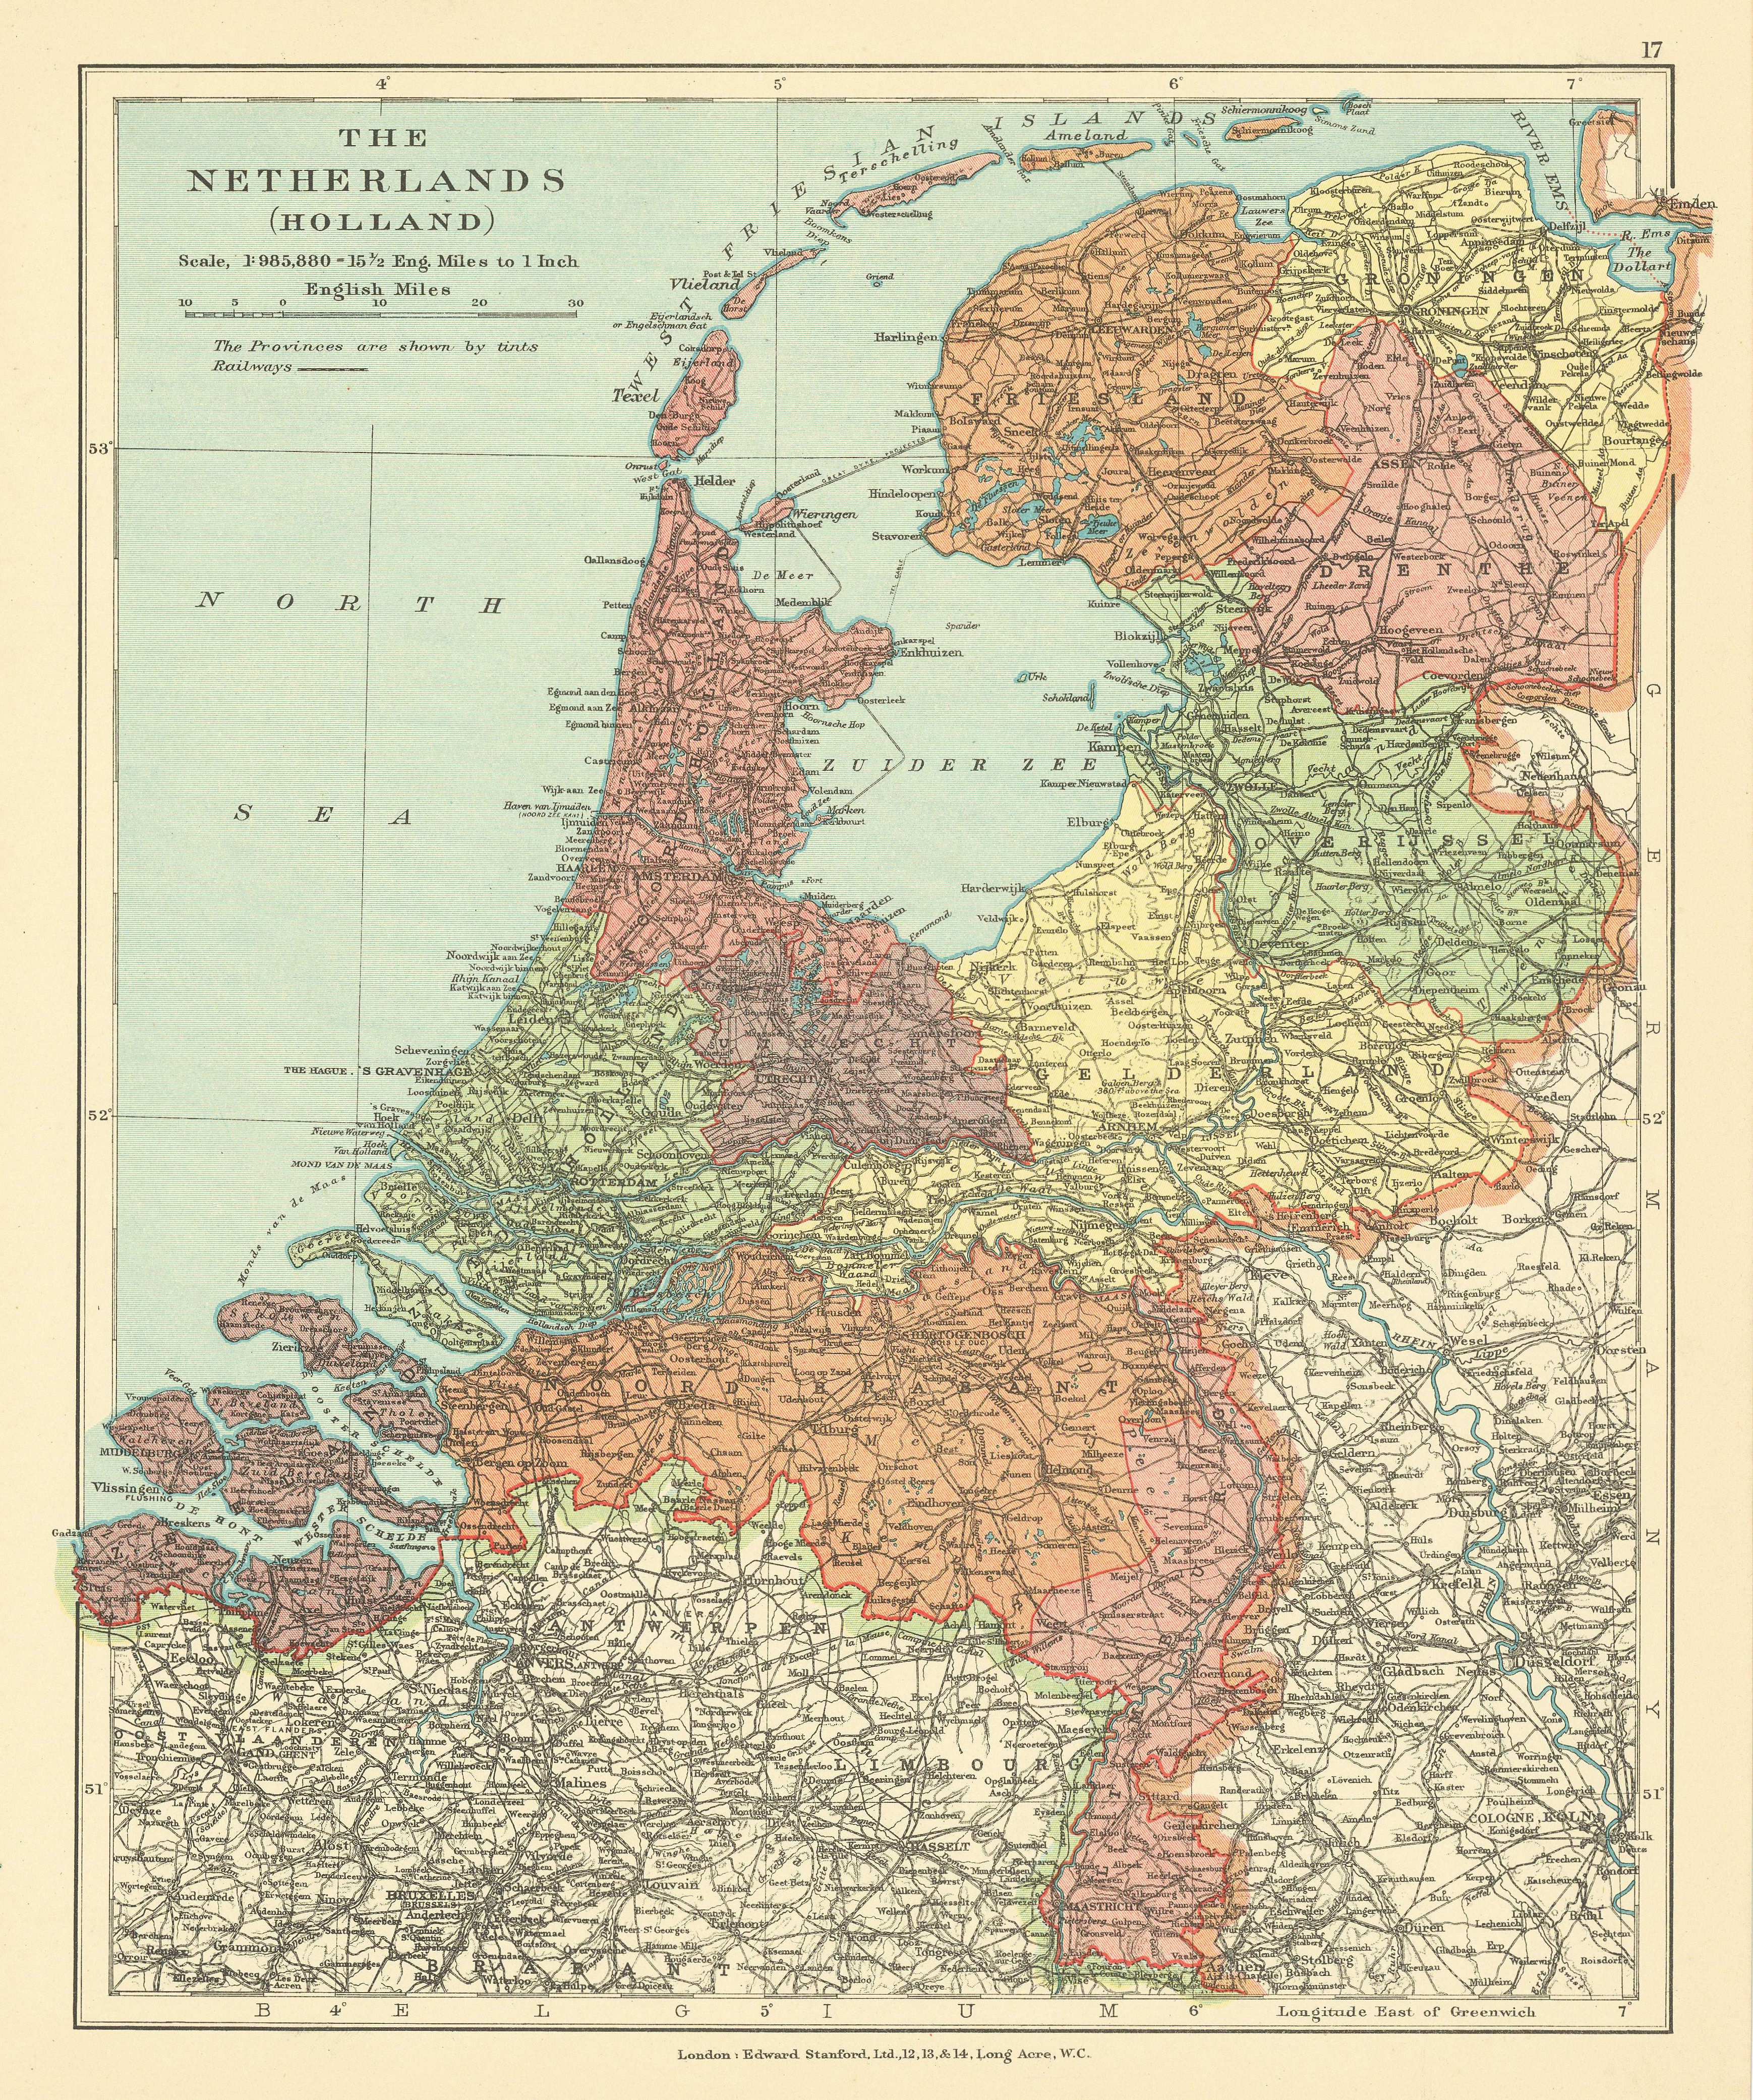 Associate Product The Netherlands (Holland) in provinces / provincies. STANFORD c1925 old map